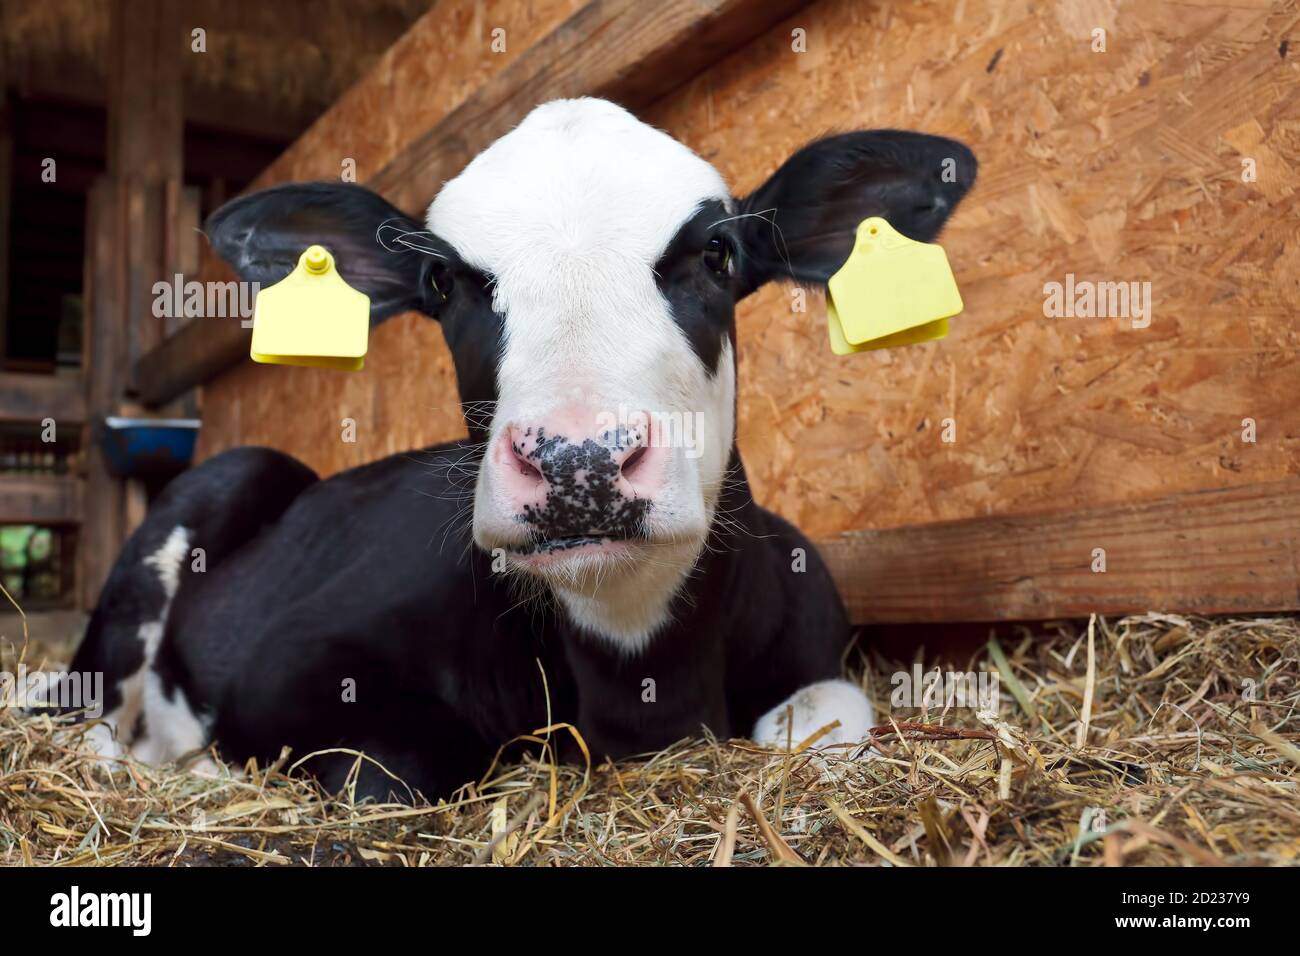 Young black and white dutch calf in stable Stock Photo